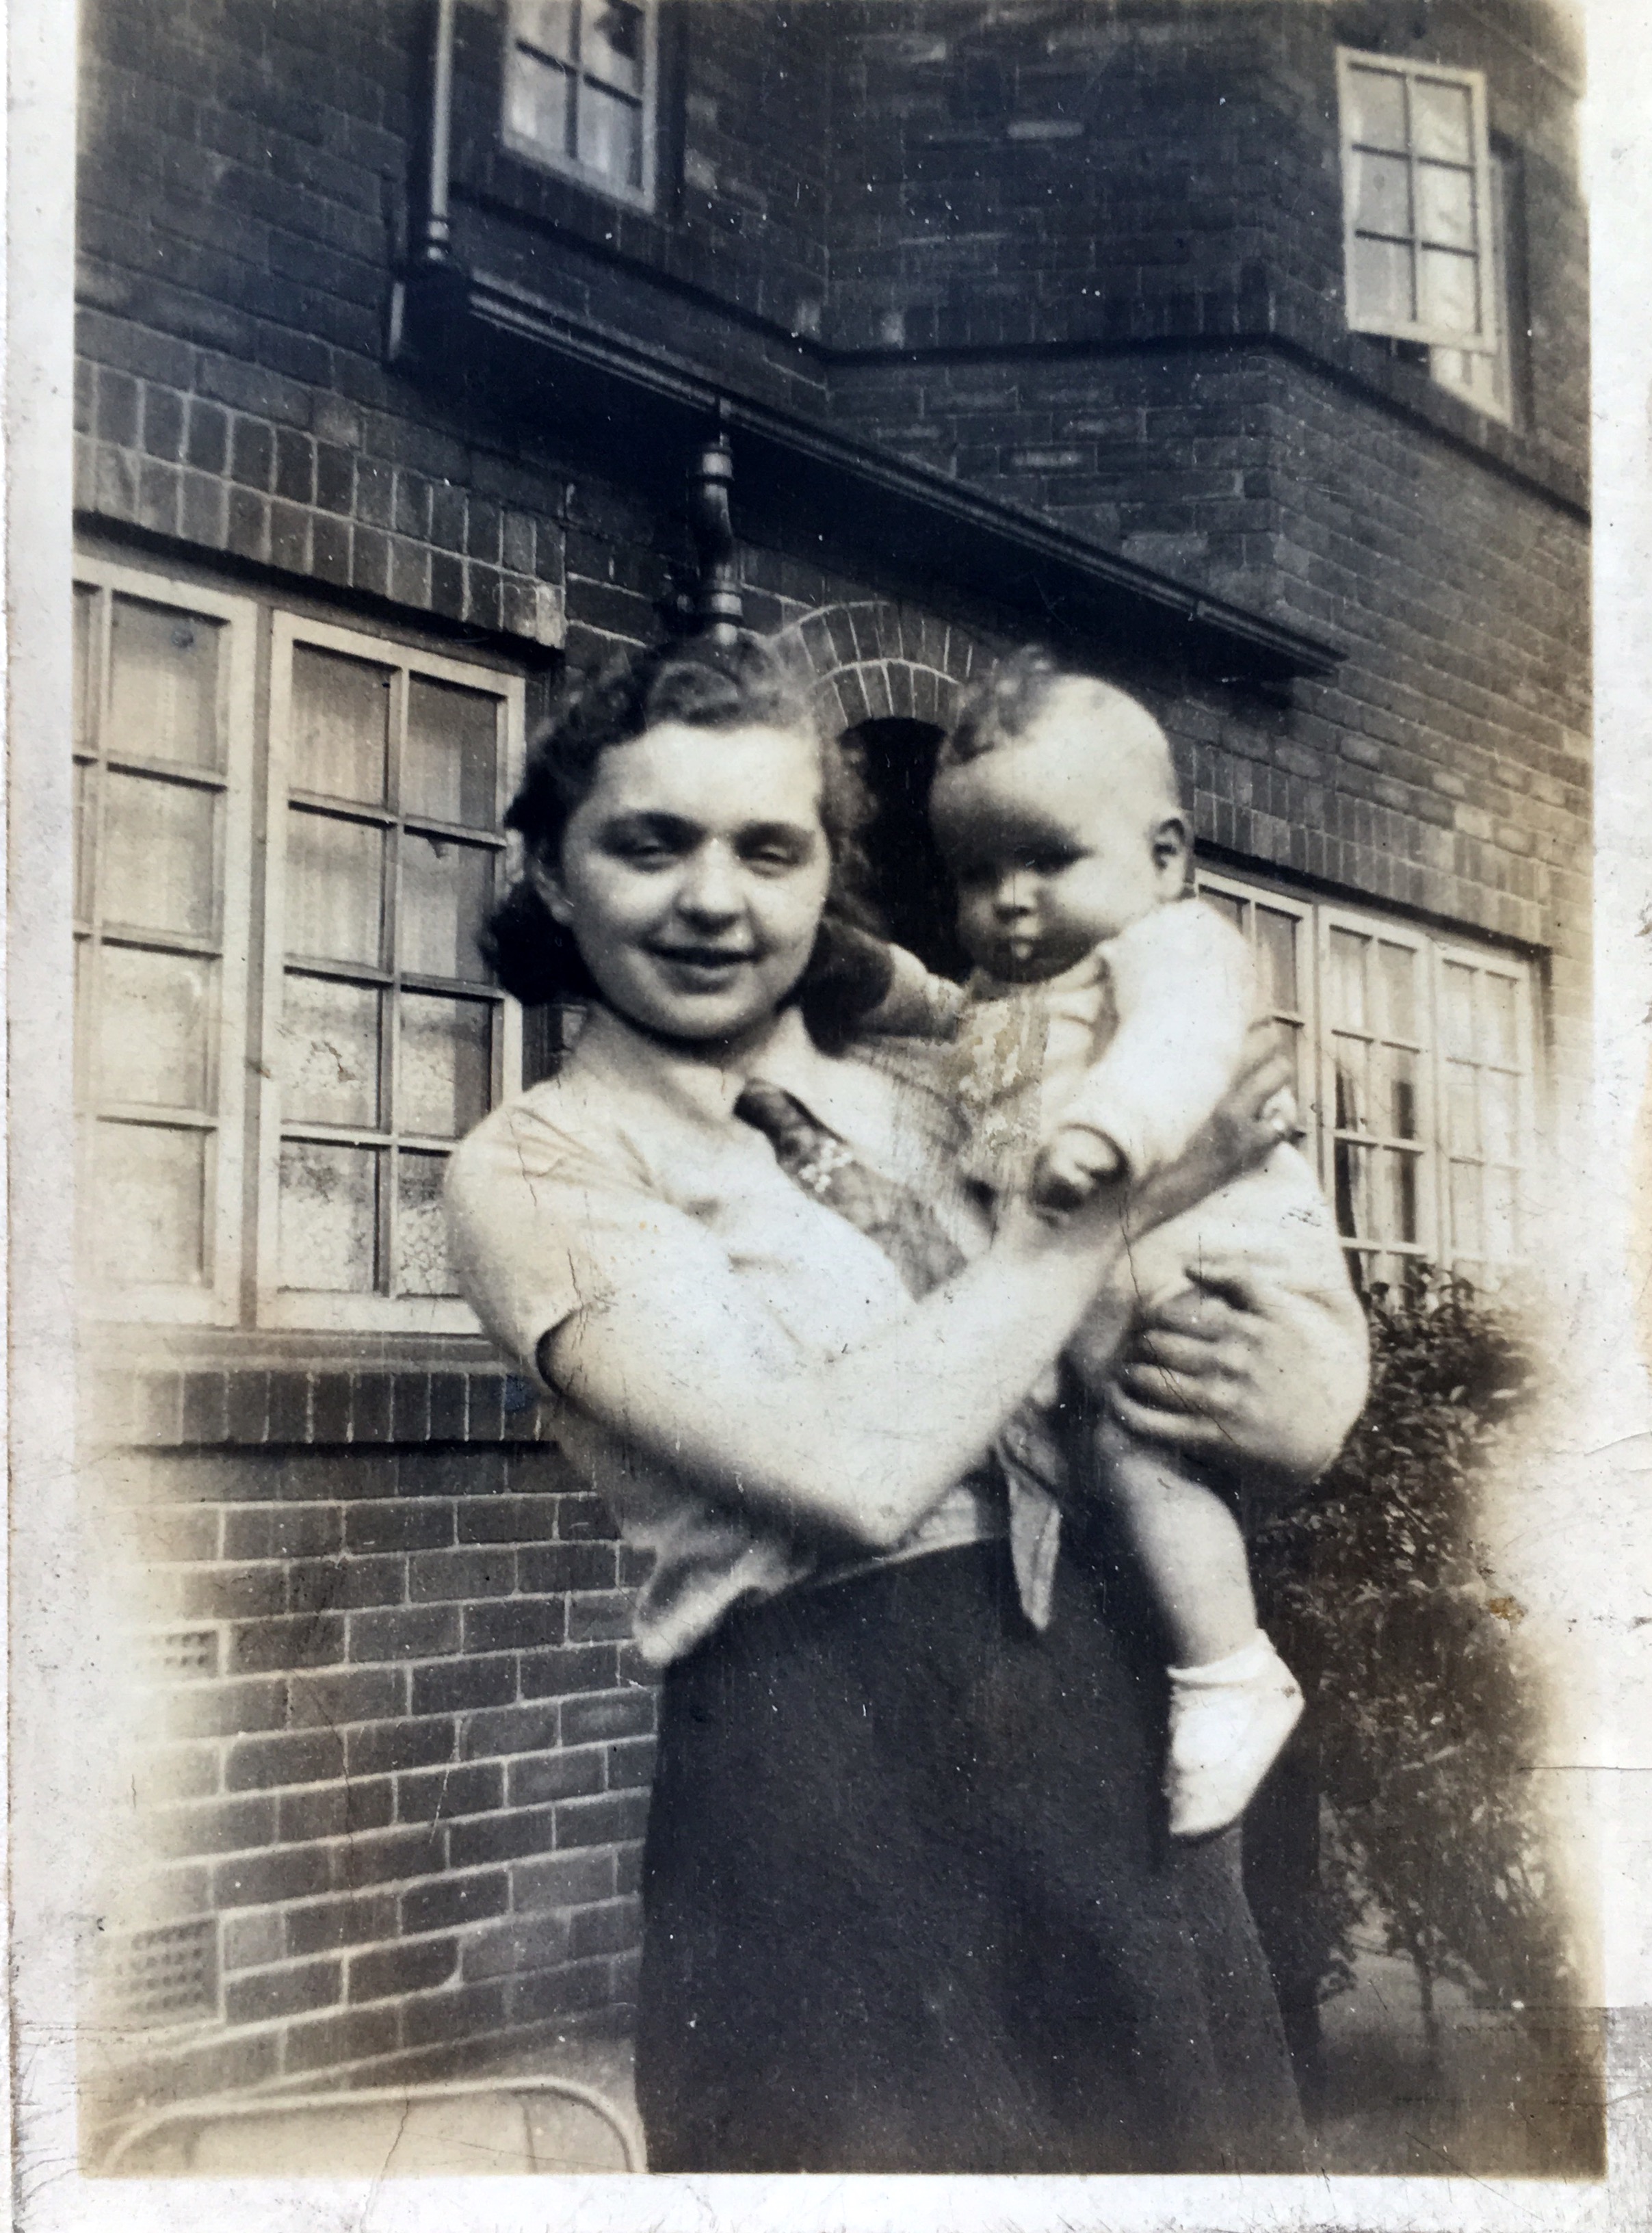 Marjorie Ward with her brother Brian, Leeds, Yorkshire, ca. 1940